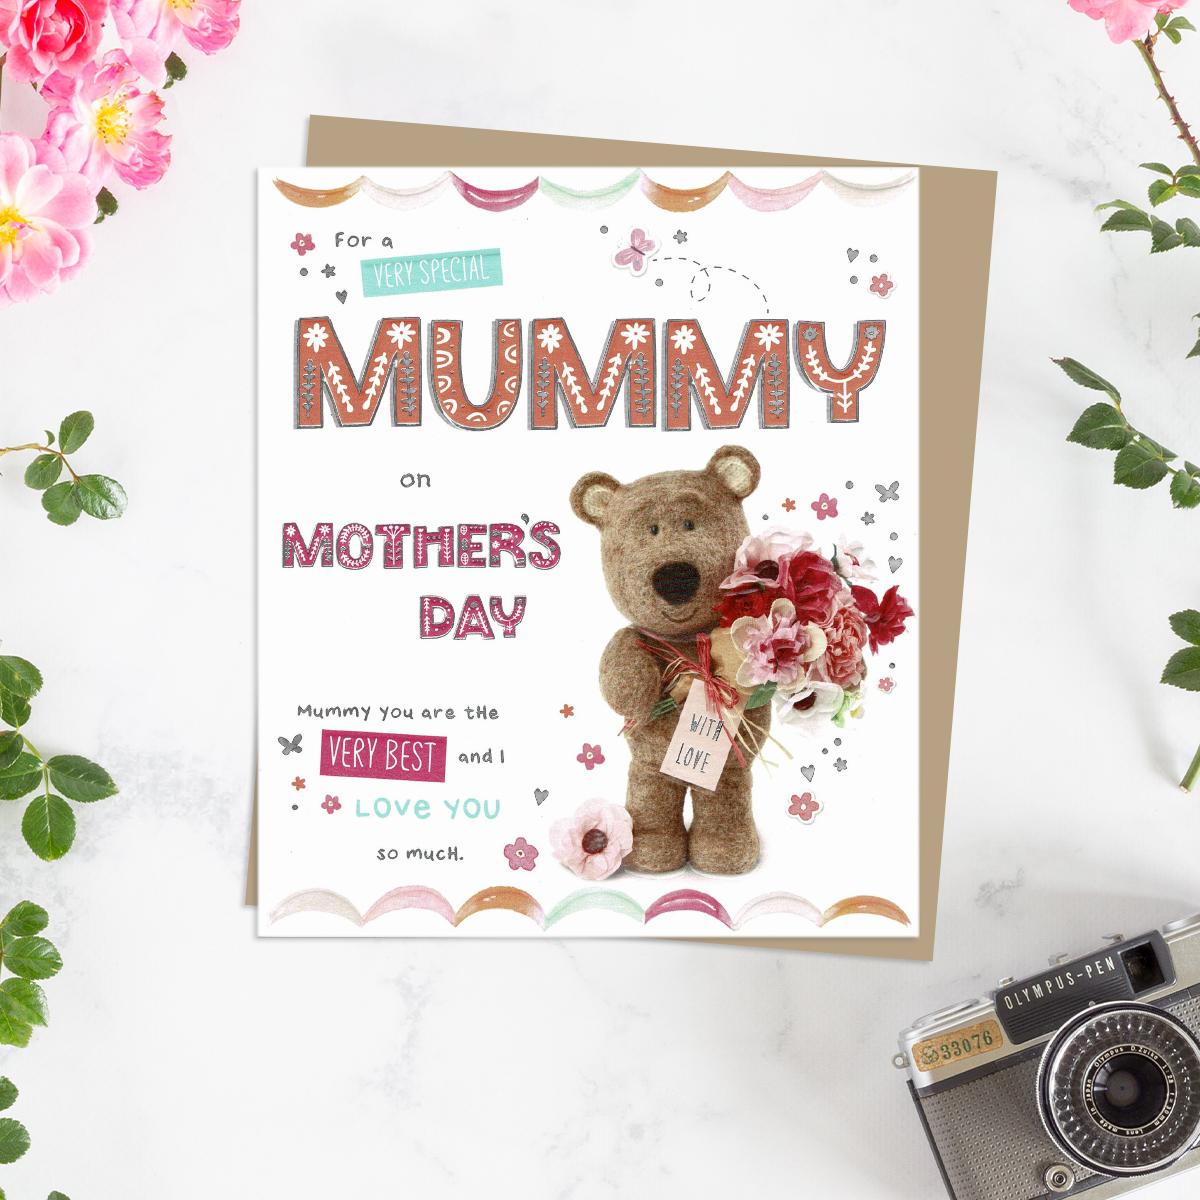 For A Very Special Mummy On Mother's Day' Featuring Barley Bear With Flowers! Complete With Silver Foiling Detail And Brown Envelope